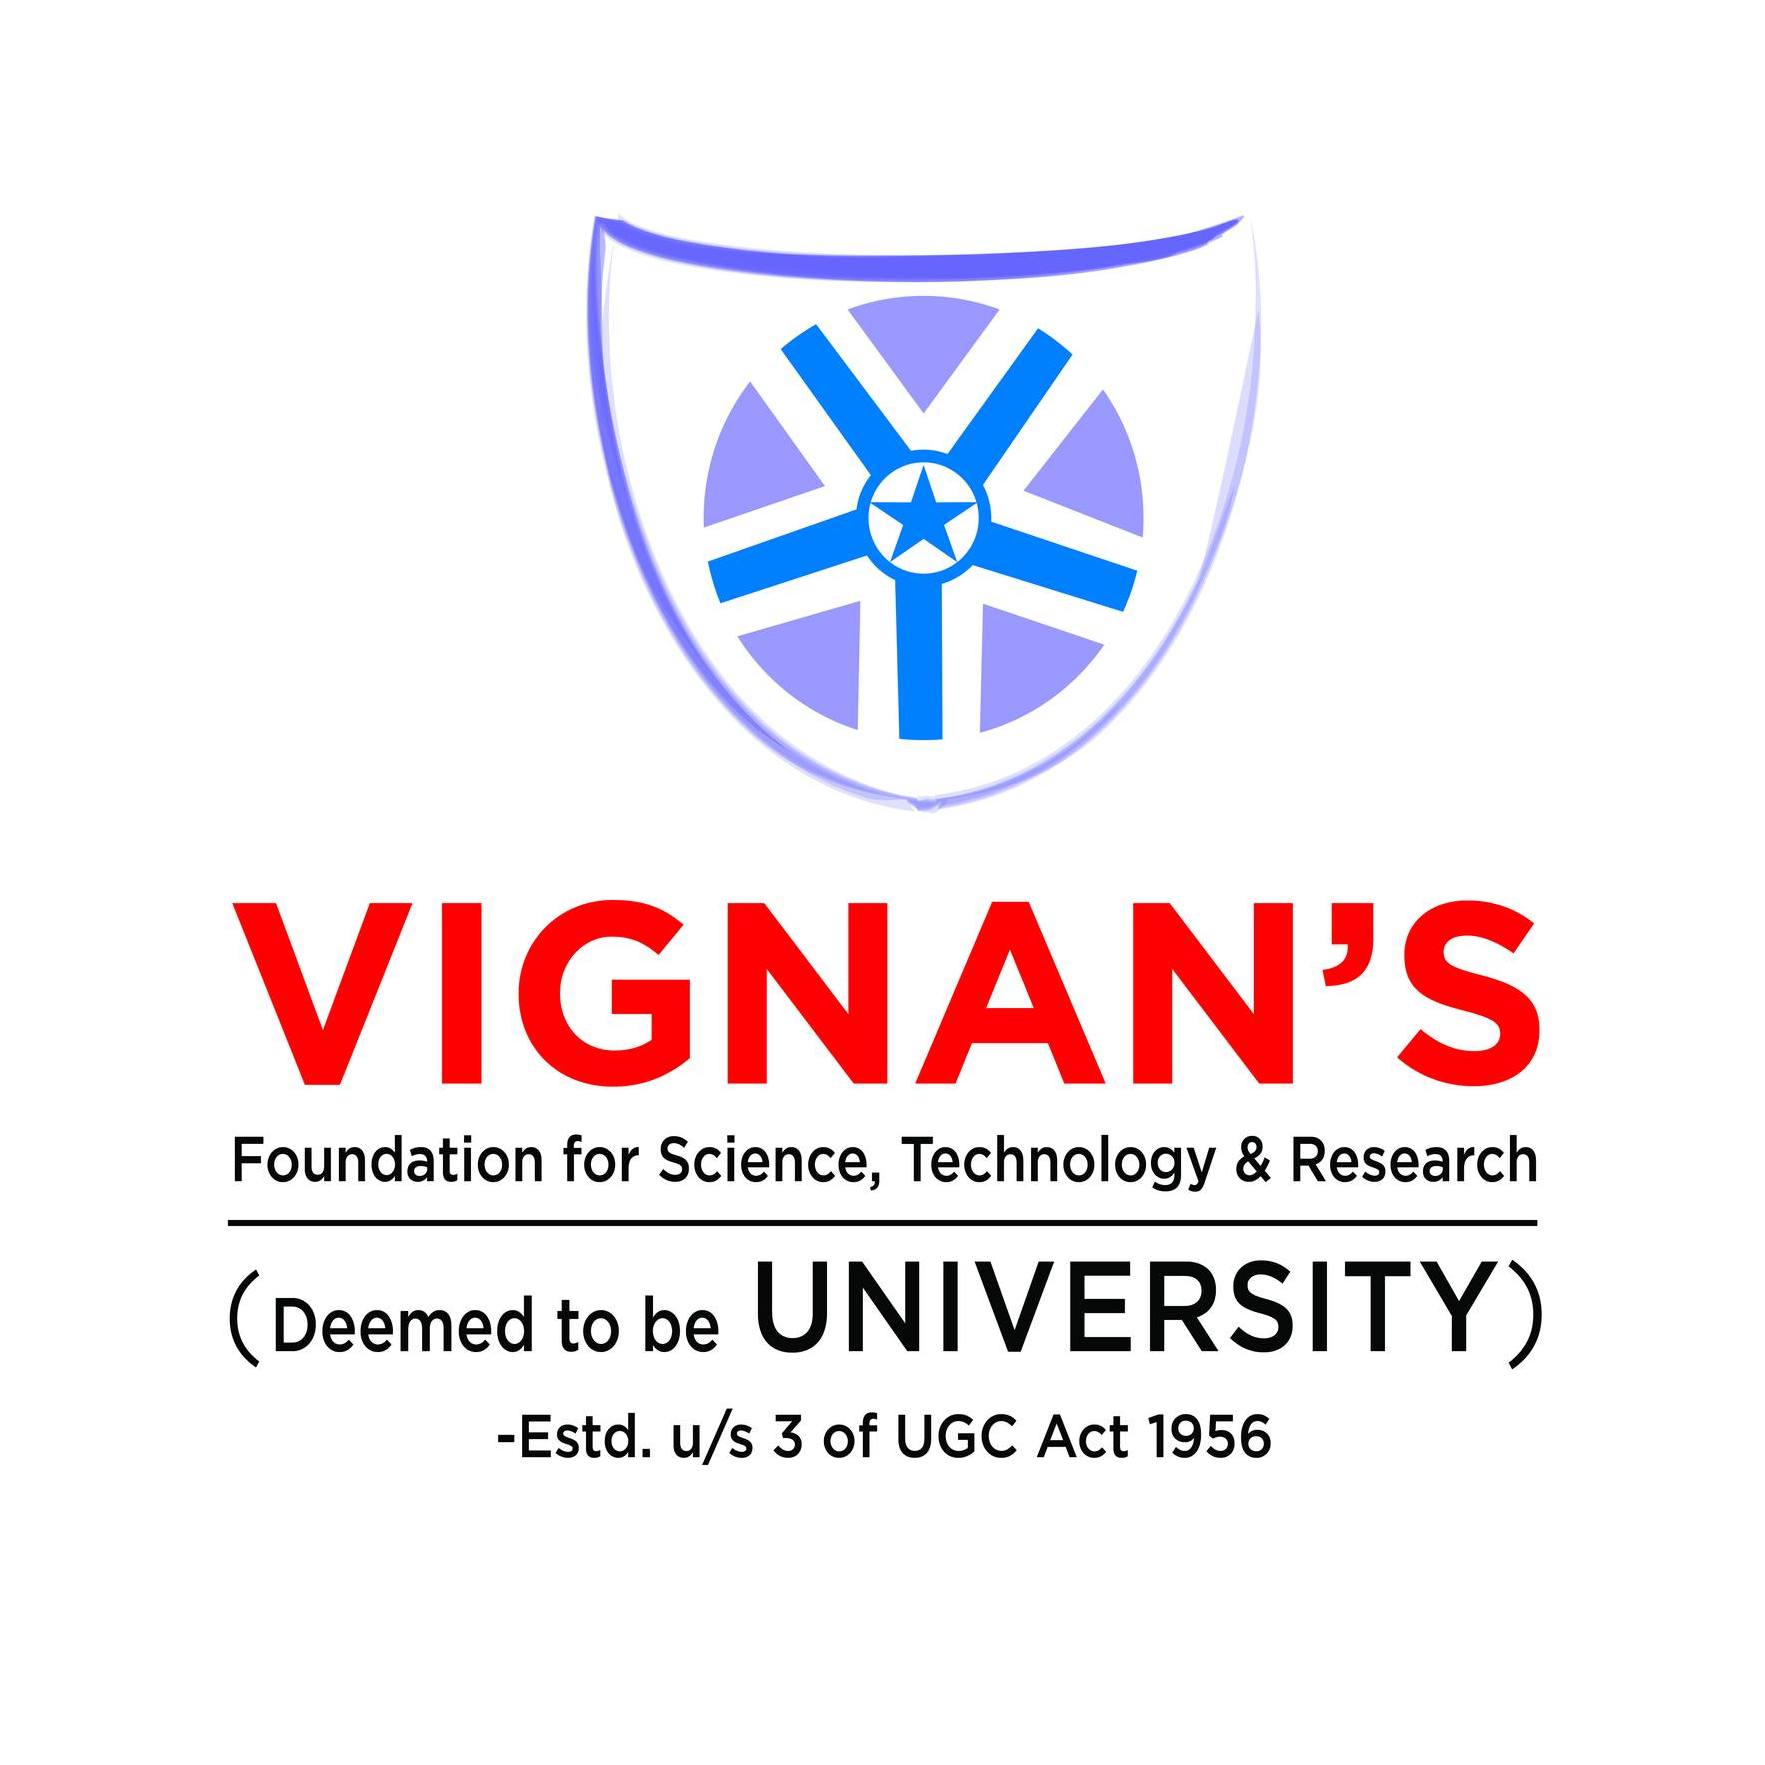 Vignan's Foundation for Science, Technology & Research logo